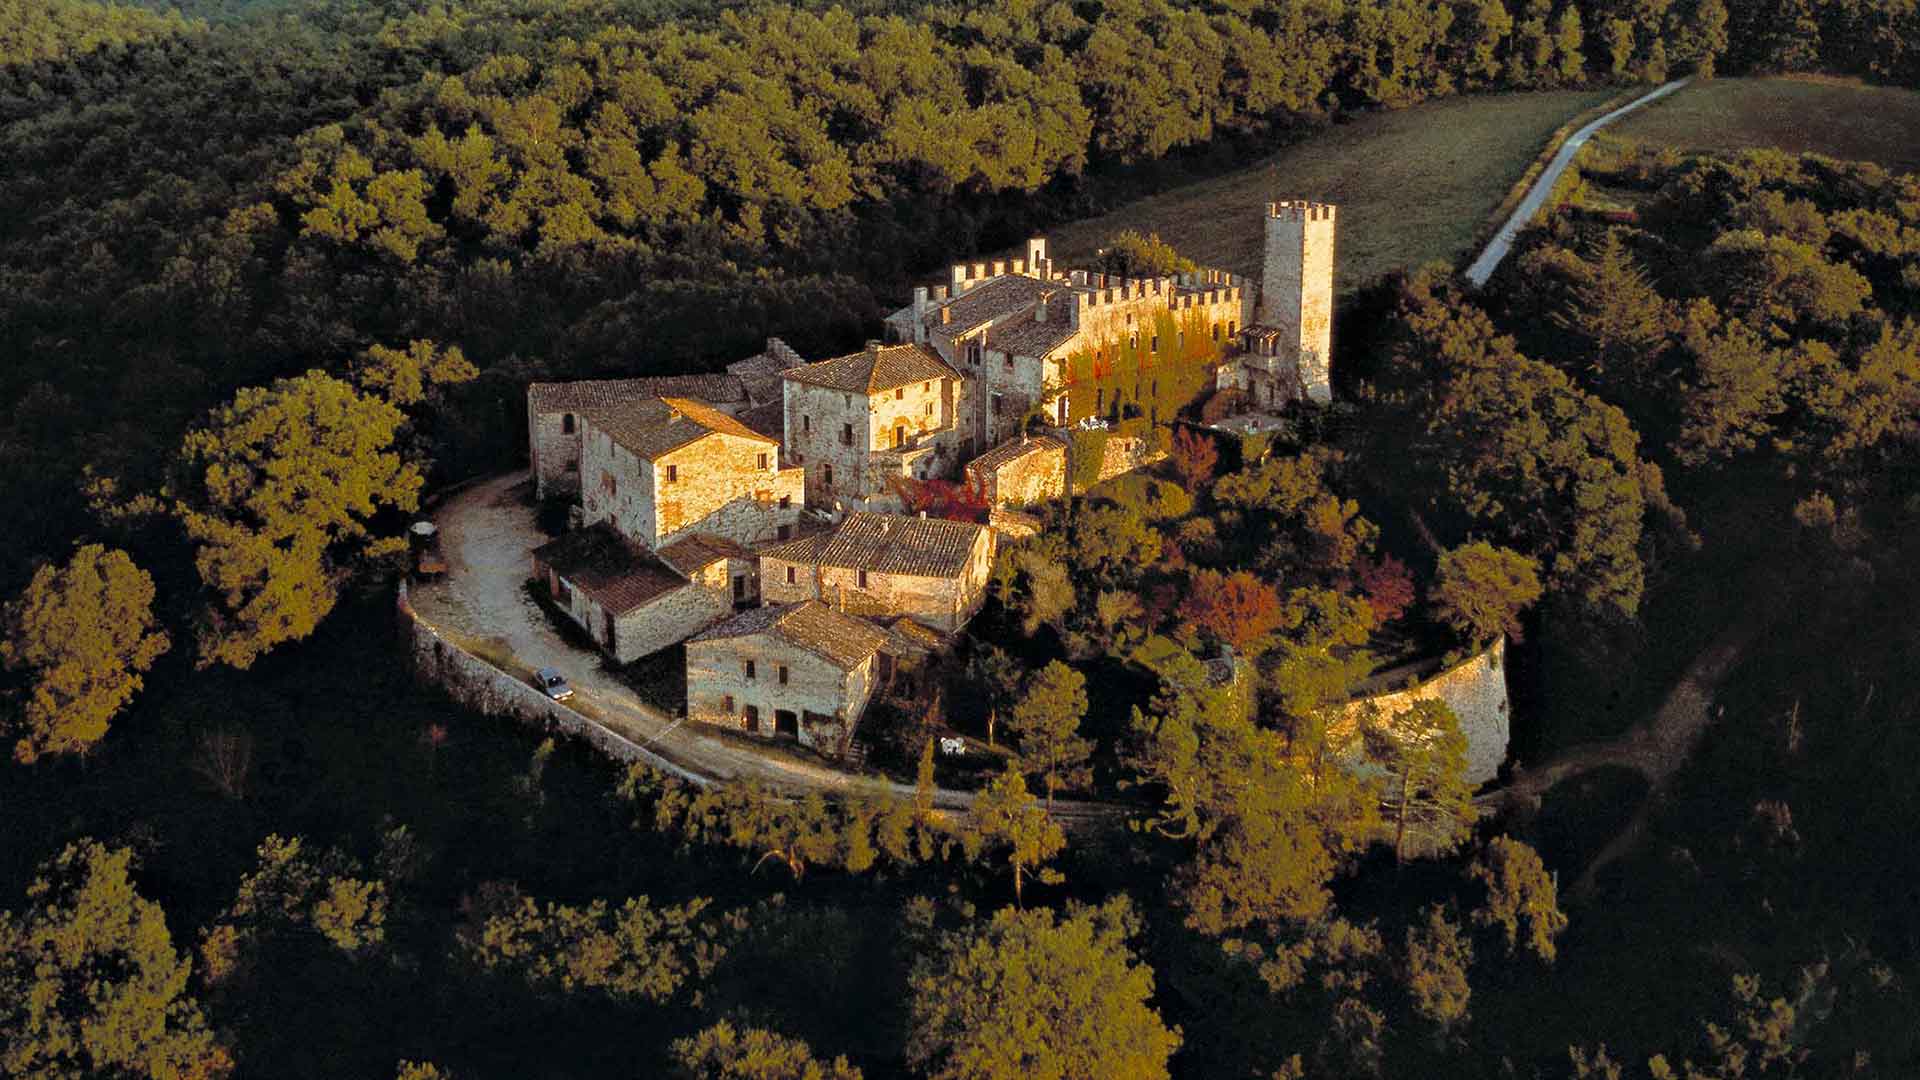 A medieval castle nestled in the Chianti hills of Tuscany